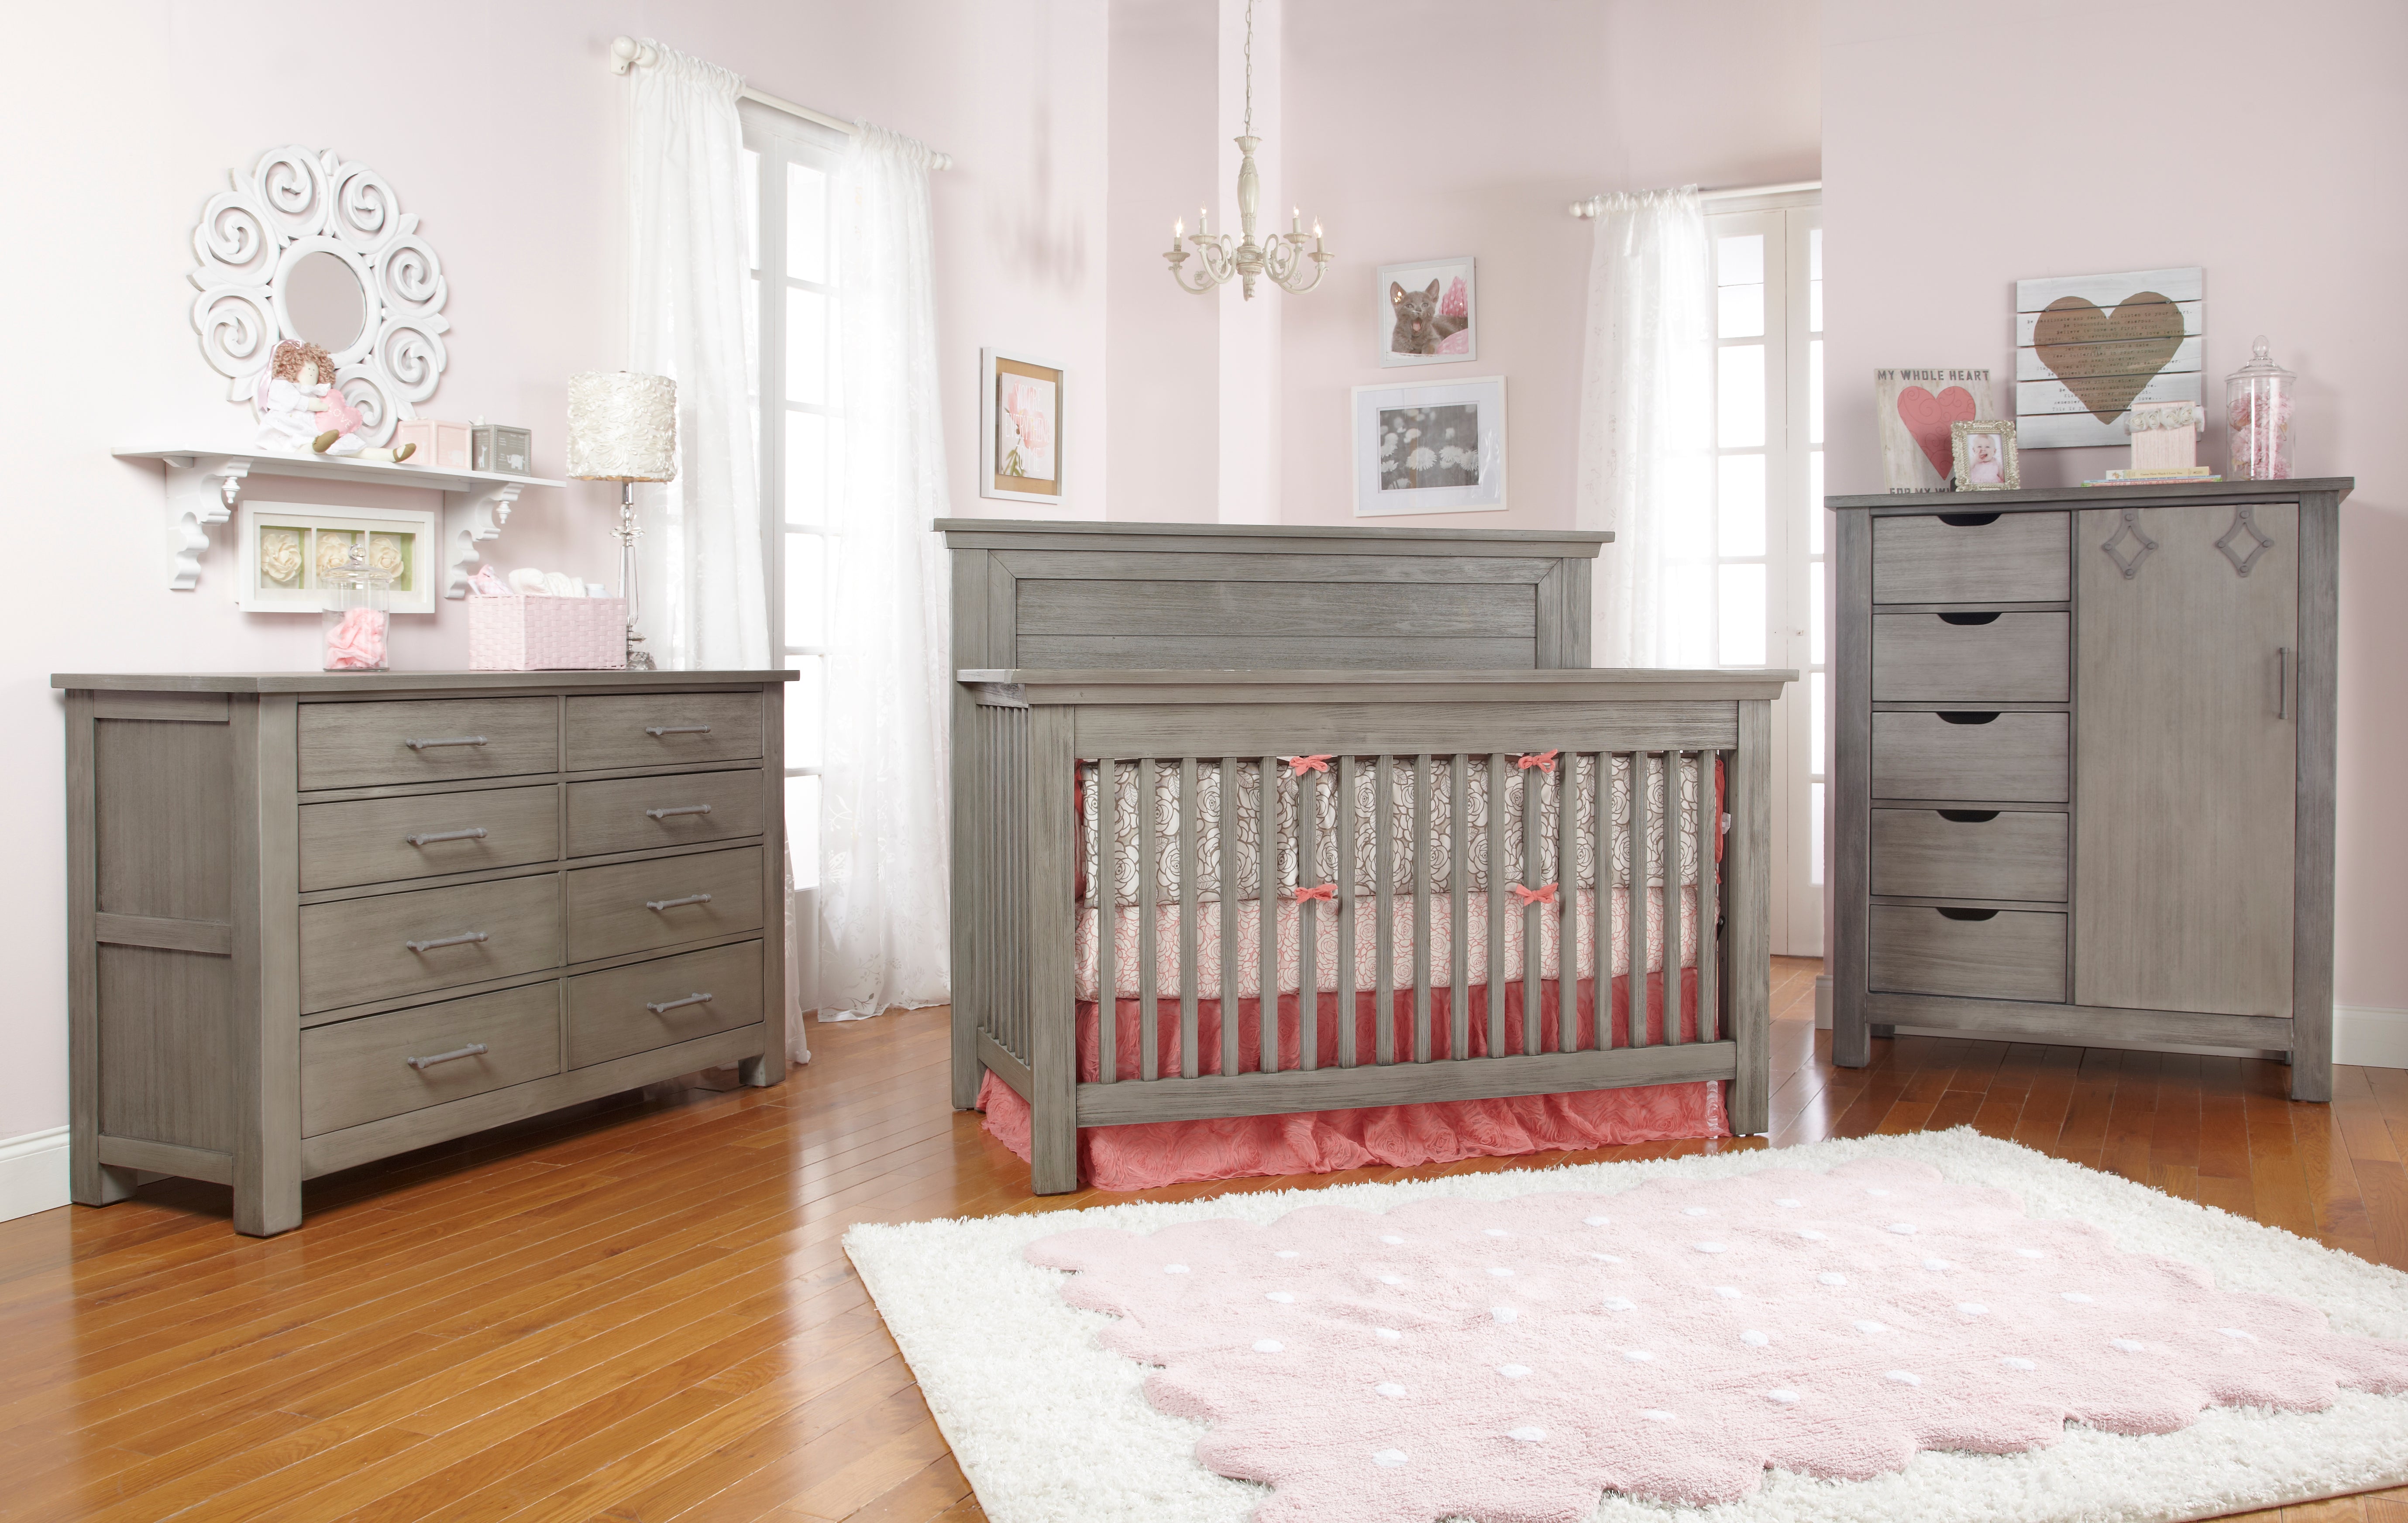 Lucca collection (crib, double dresser, & chifforobe), shown in weathered grey